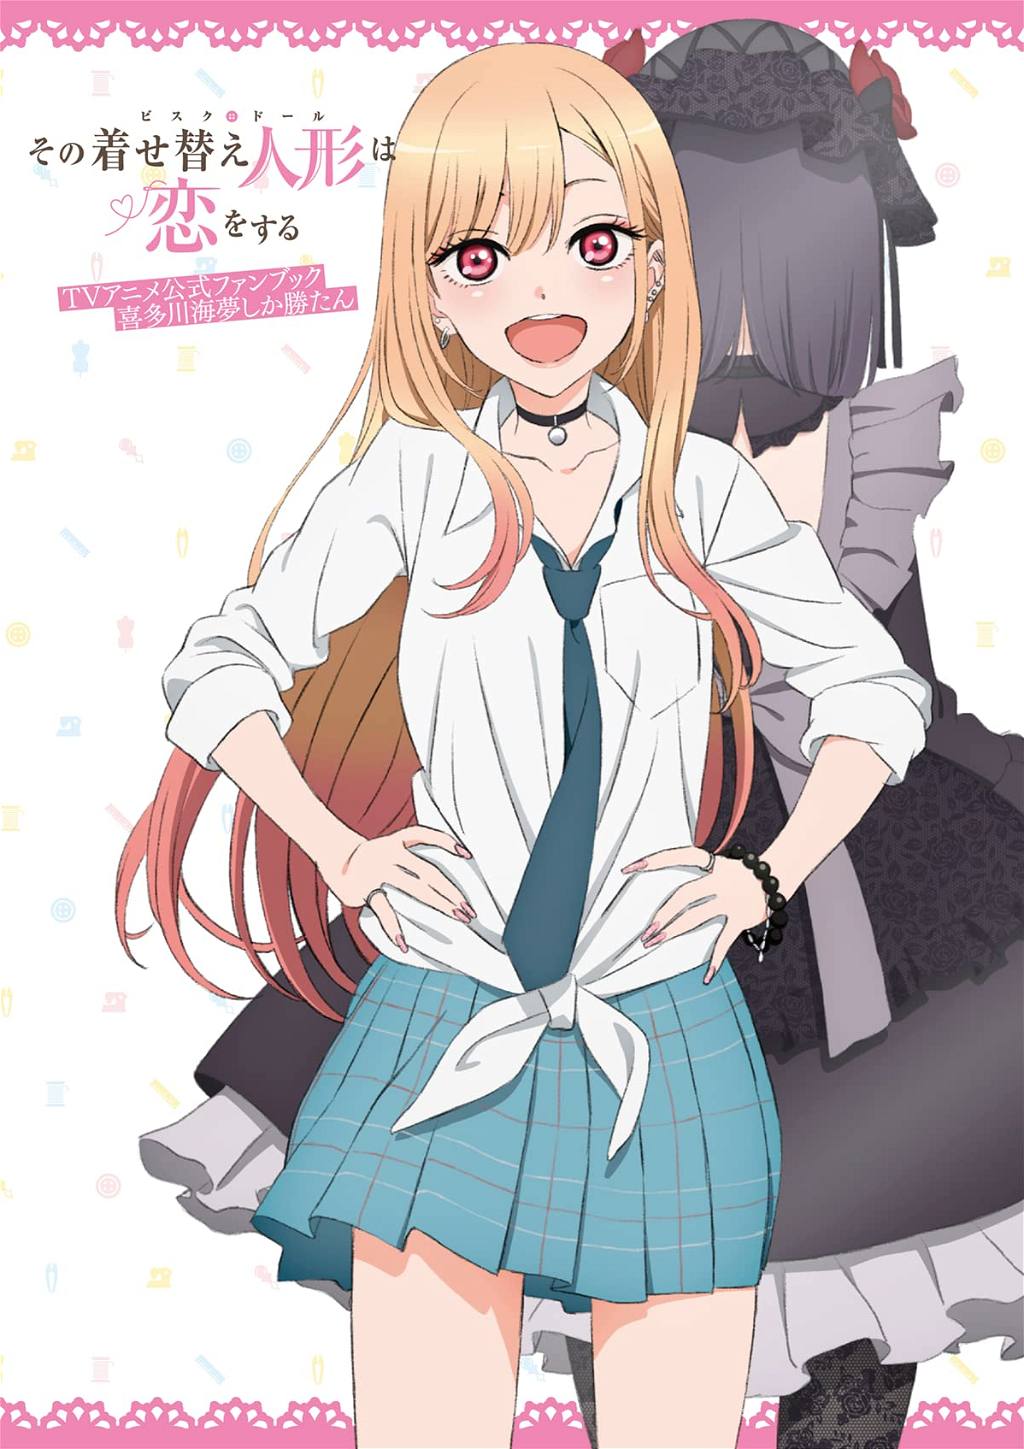 My Dress-Up Darling TV Anime Official Fanbook